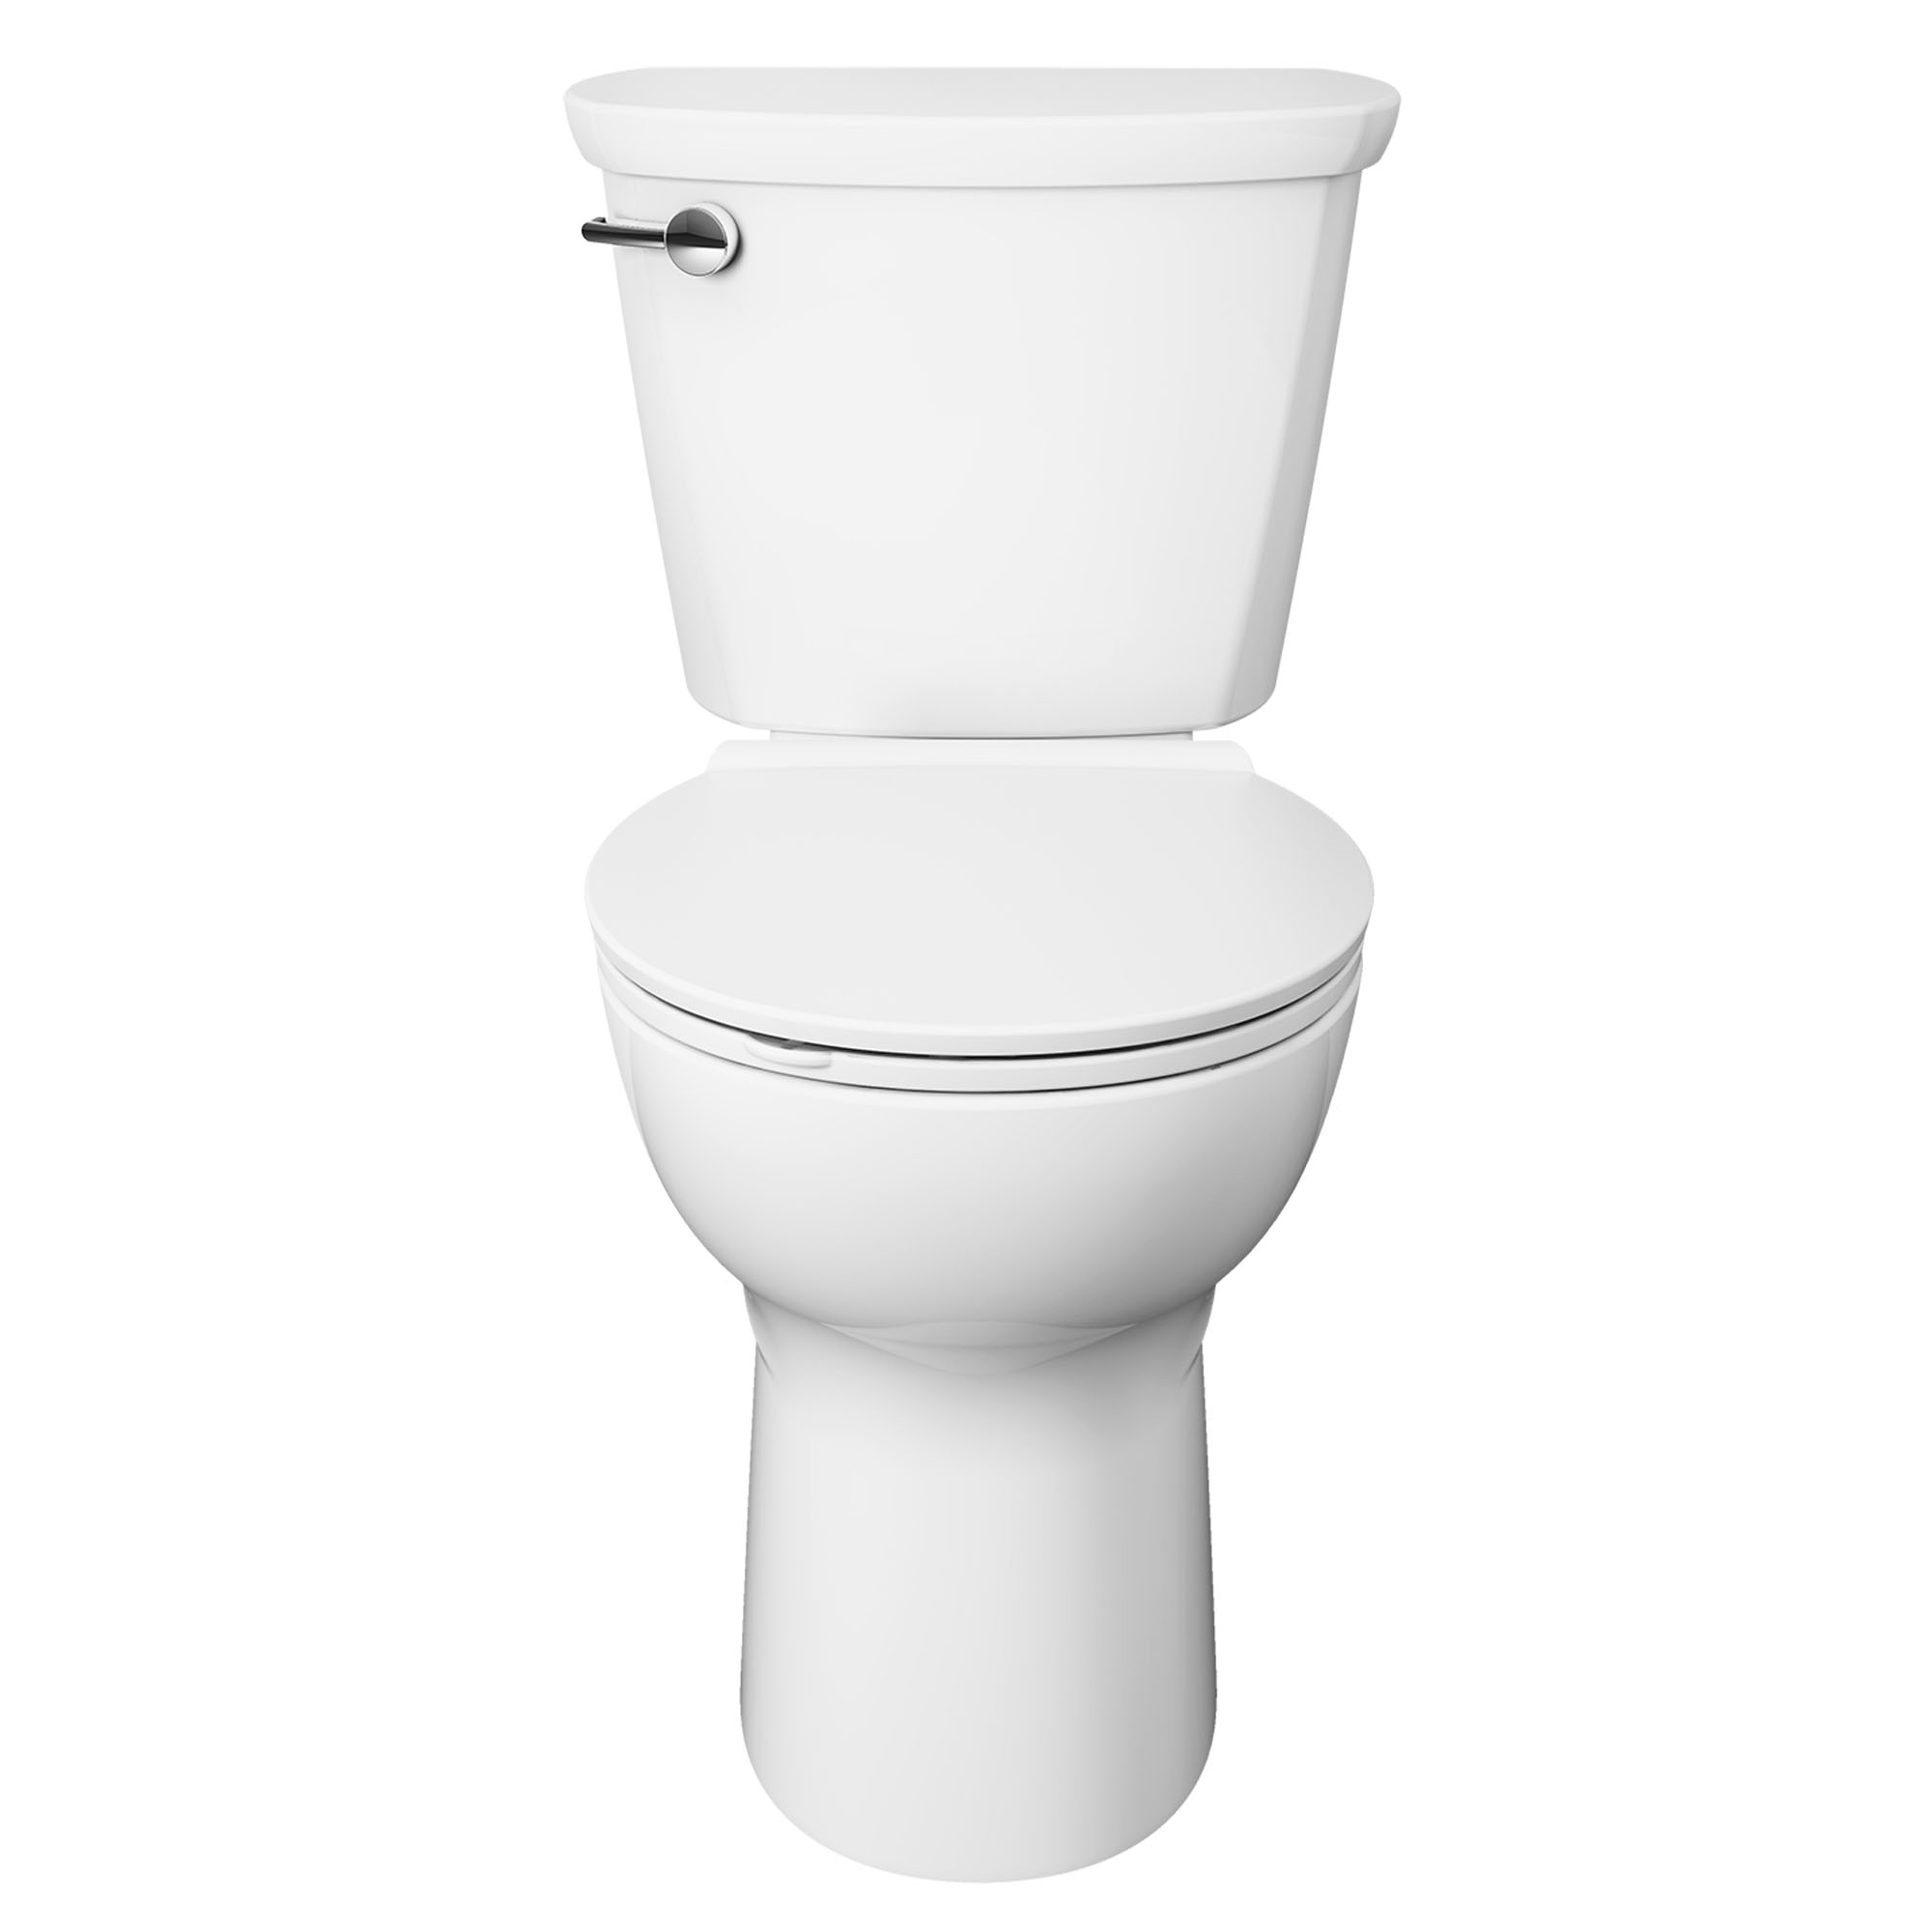 Cadet™ PRO Two-Piece 1.6 gpf/6.0 Lpf Chair Height Round Front Toilet Less Seat